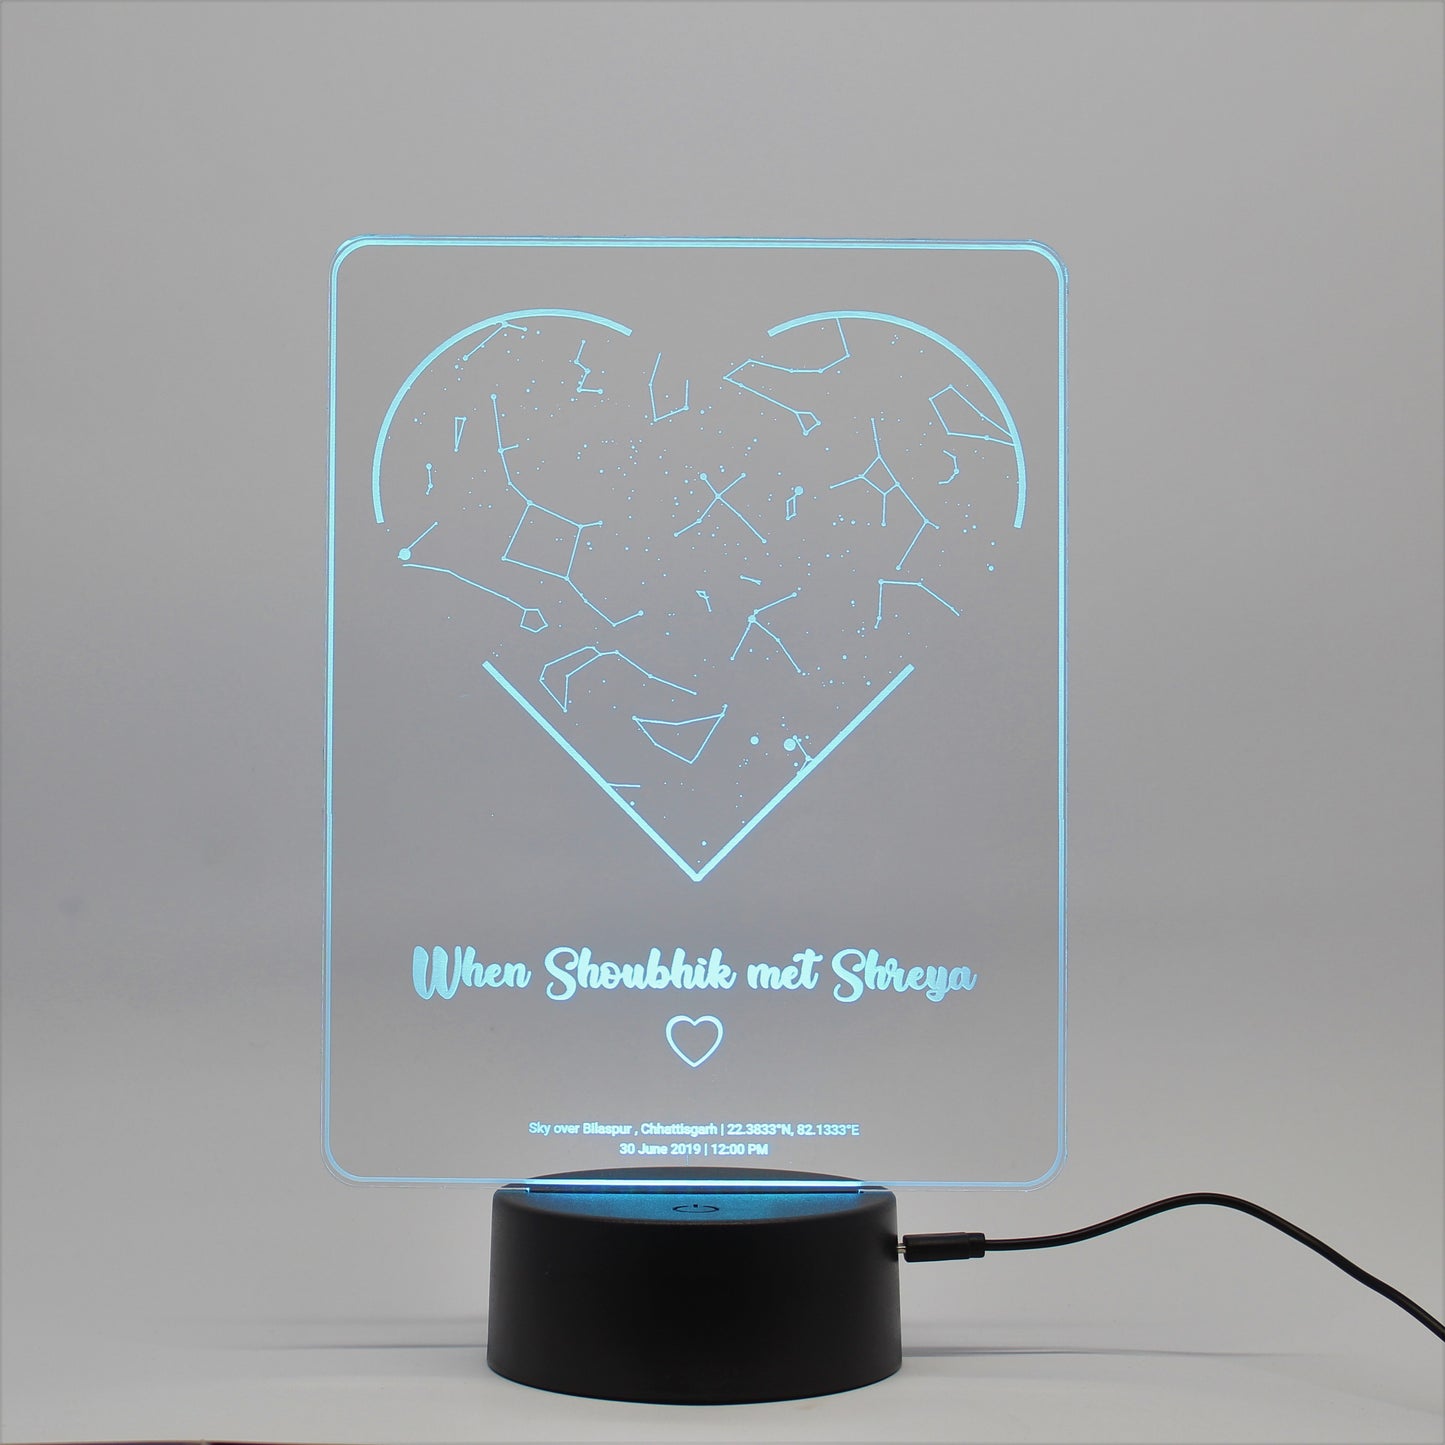 Customized Star Map Lamp with Heart Shape (Multicolored)